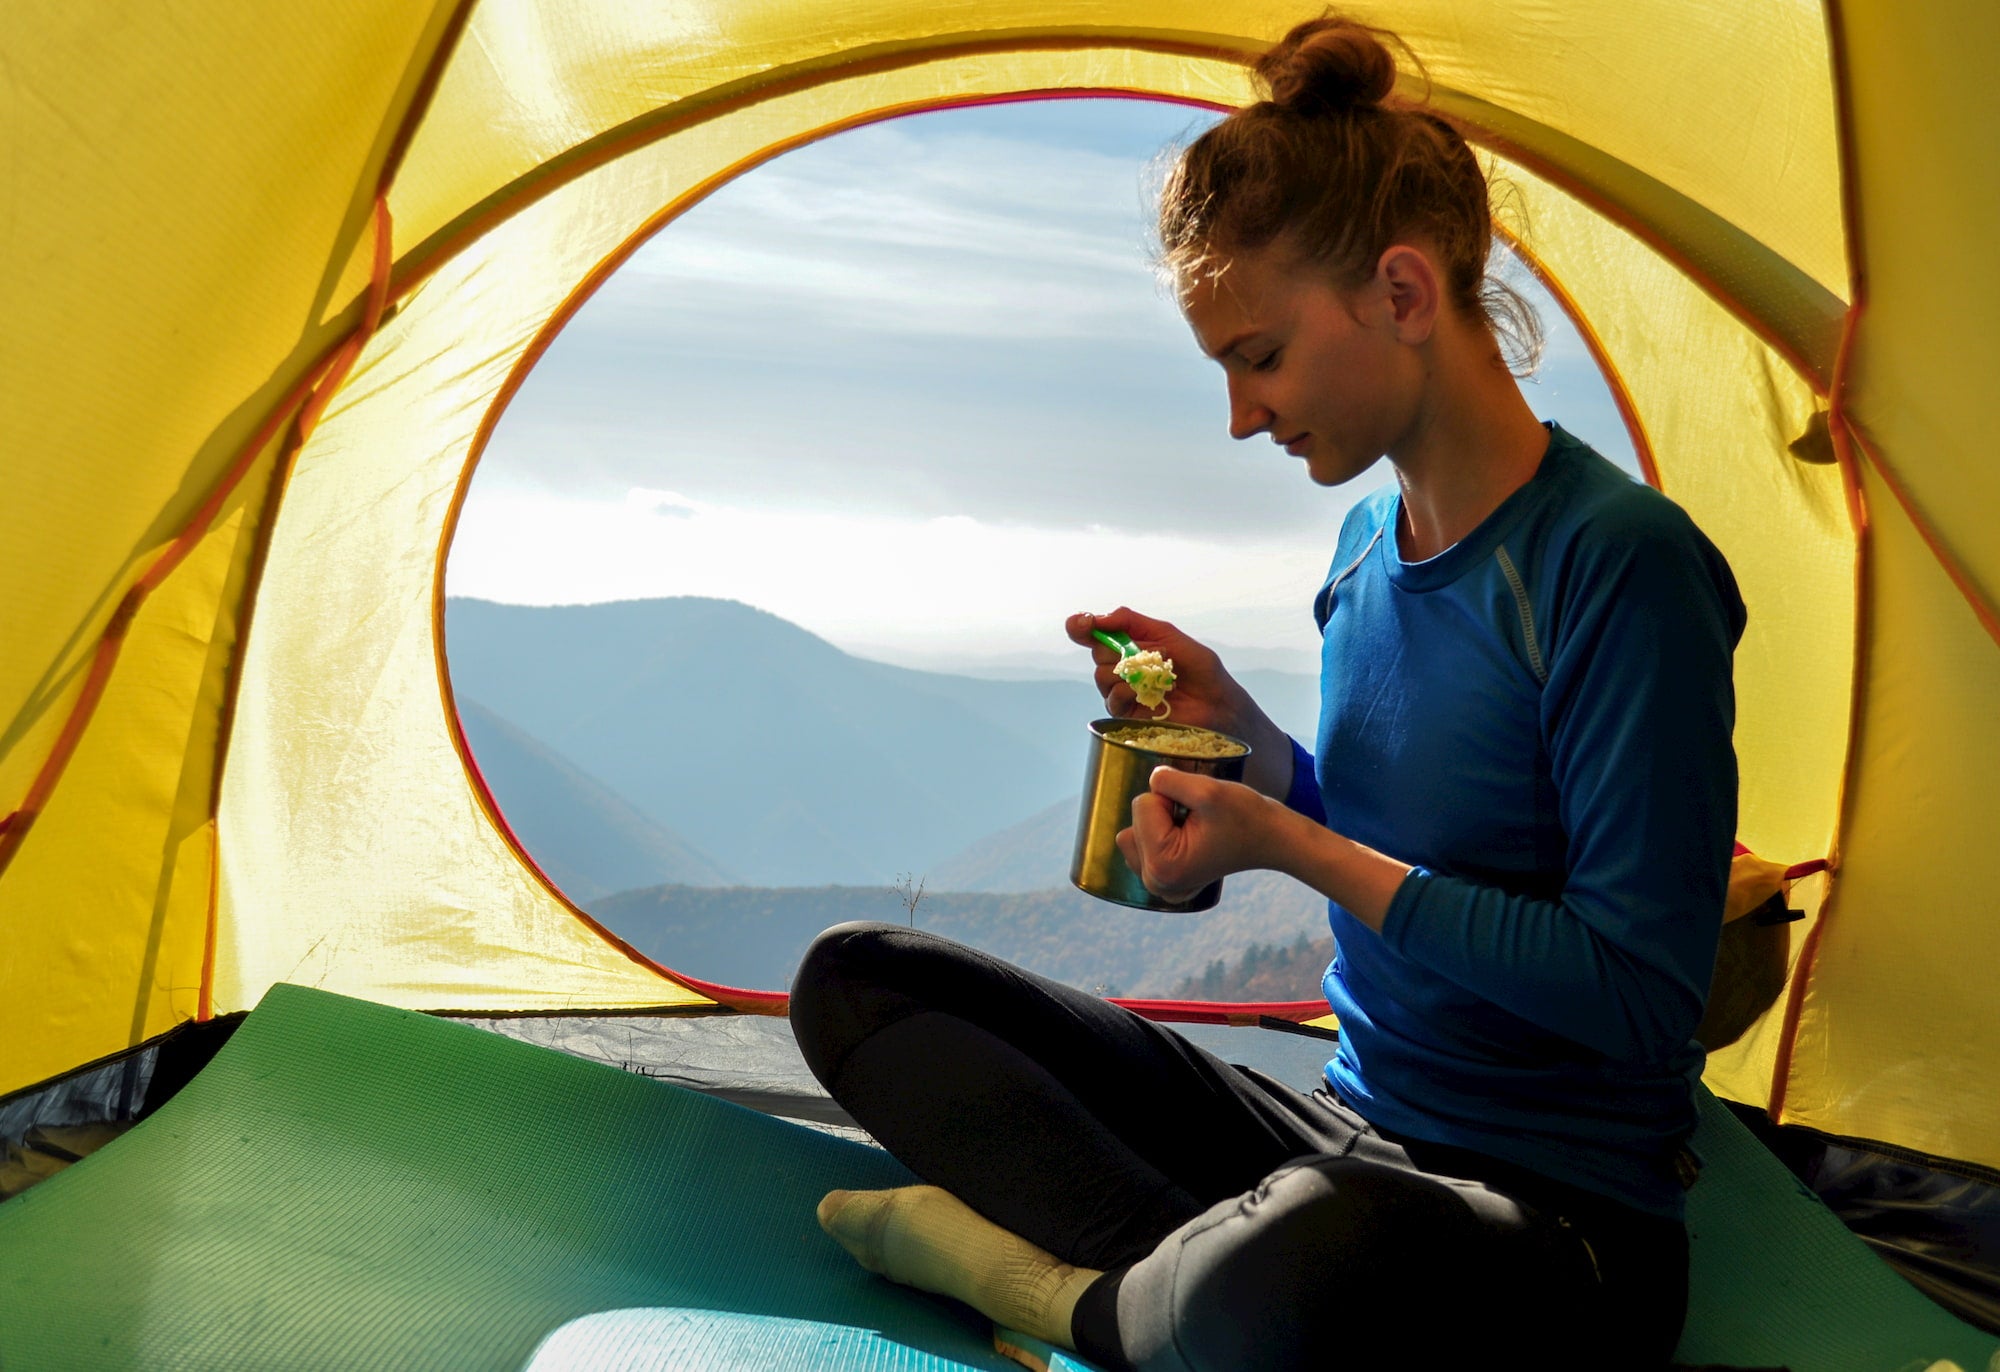 Female hiker eating food from a mug in her tent.